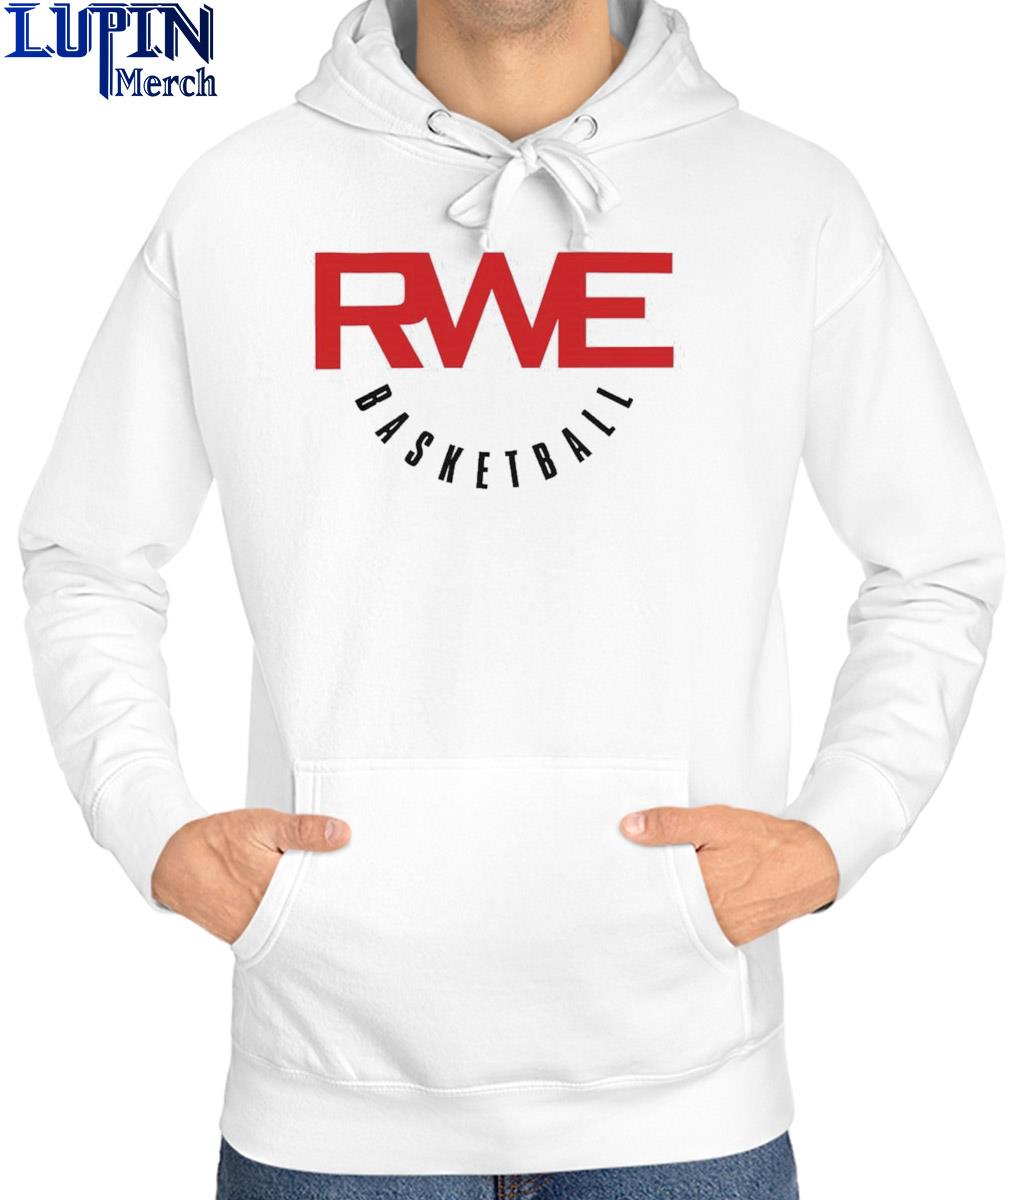 Official Rod wave elite basketball T-shirt, hoodie, tank top